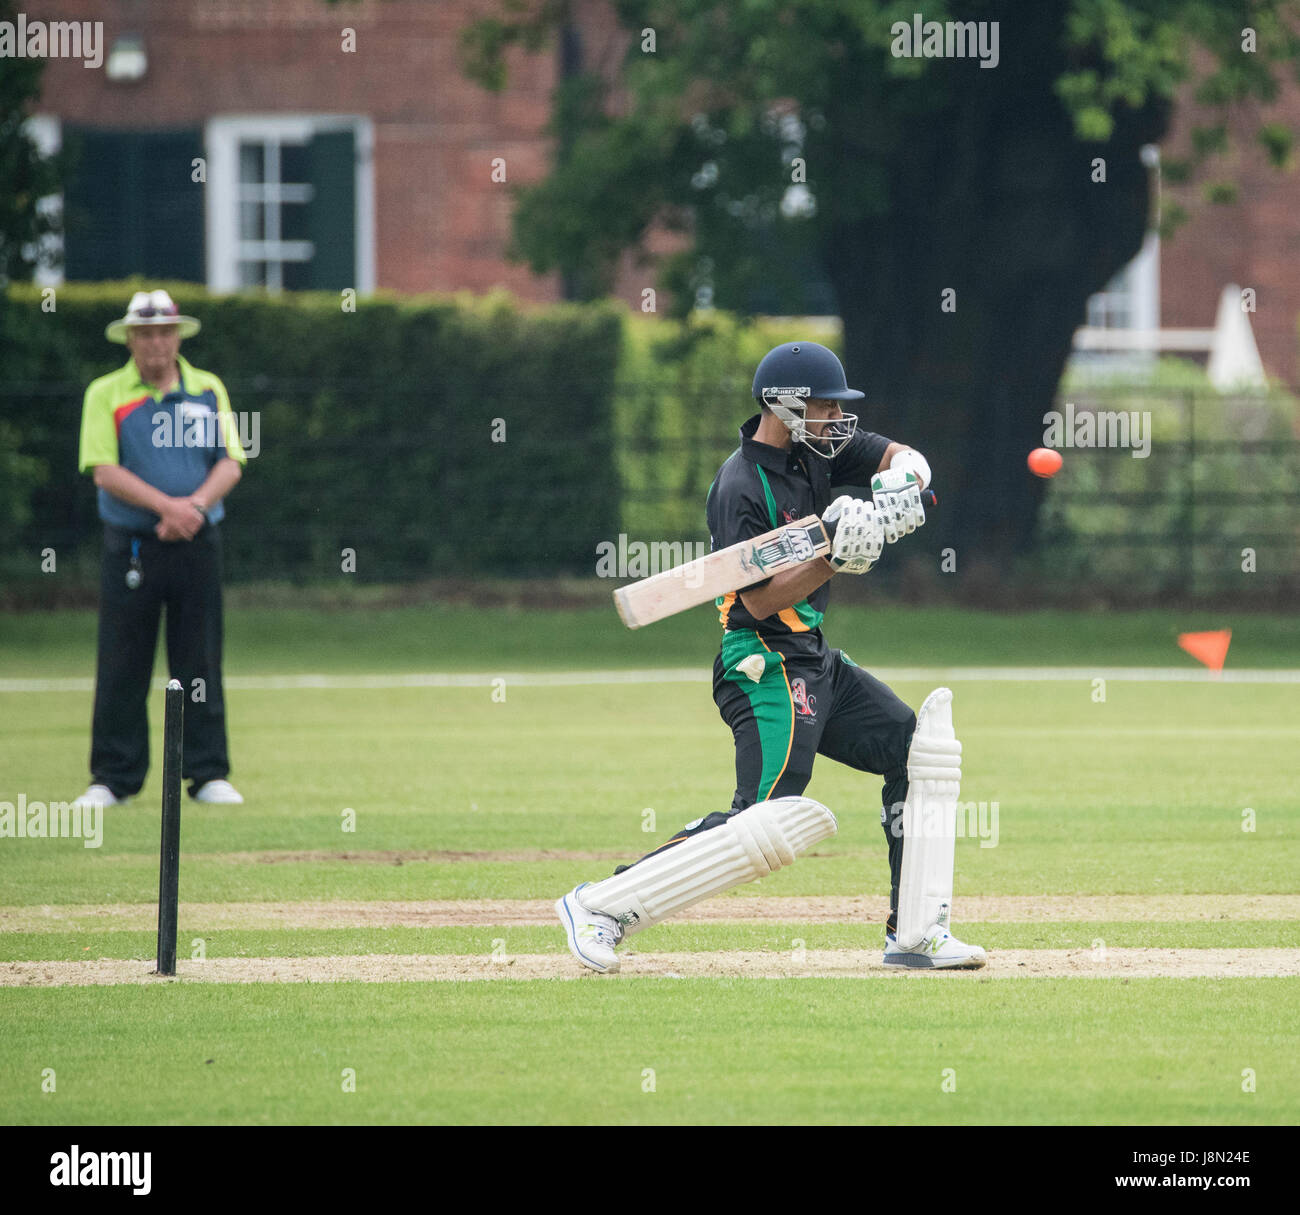 Brentwood, Essex, 29th May 2017. Shahbaz Khan bats at T20 Cricket match Brentwood Buccaneers vs Harold Wood at the Old County Ground, Brentwood, Credit: Ian Davidson/Alamy Live News Stock Photo